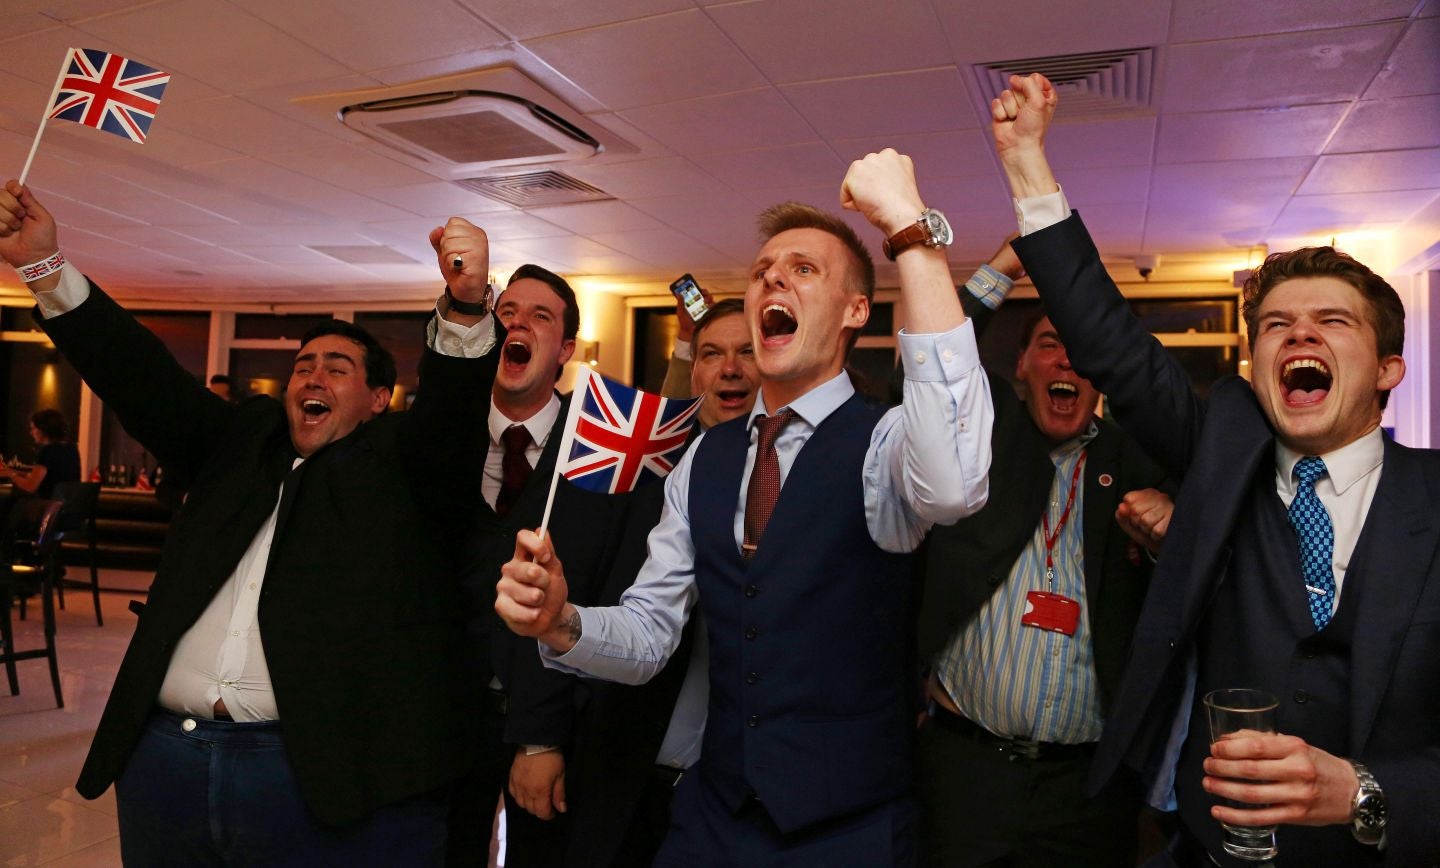 Leave.EU supporters celebrate last night’s early results at their referendum party at Millbank Tower in central London